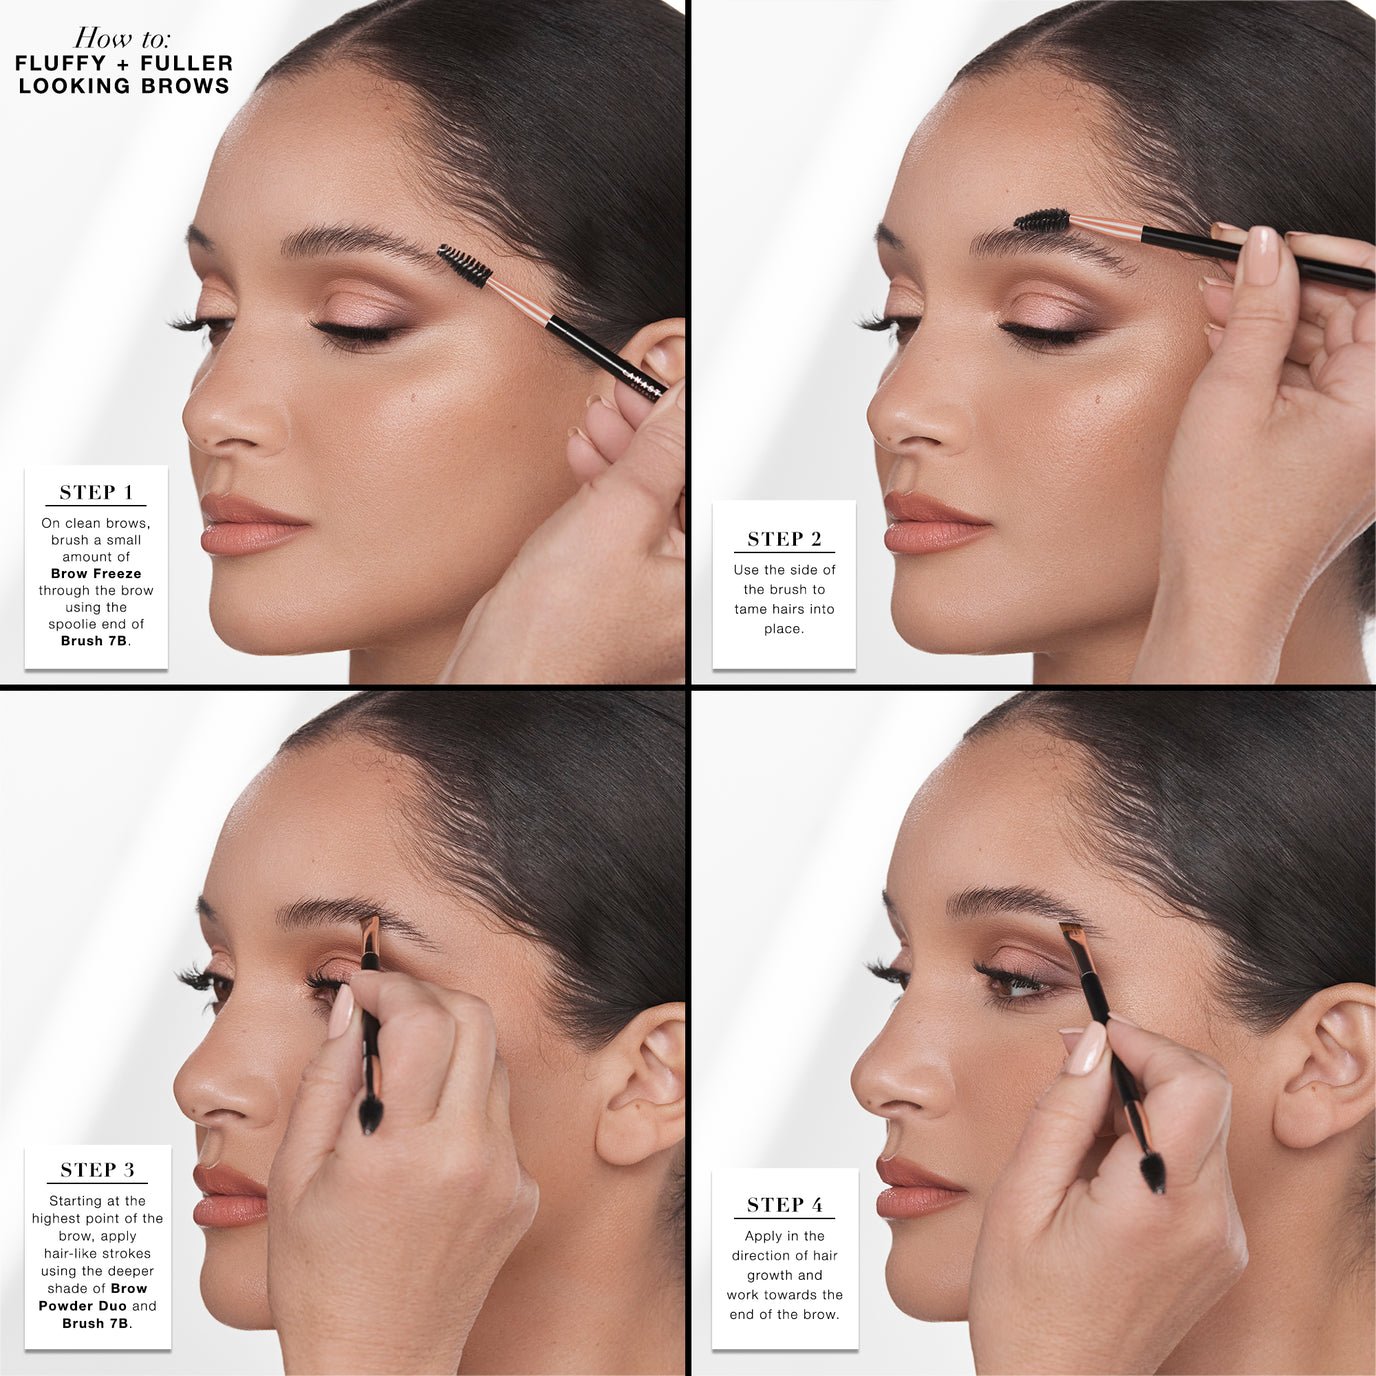 Fluffy & Fuller-Looking Brow Kit